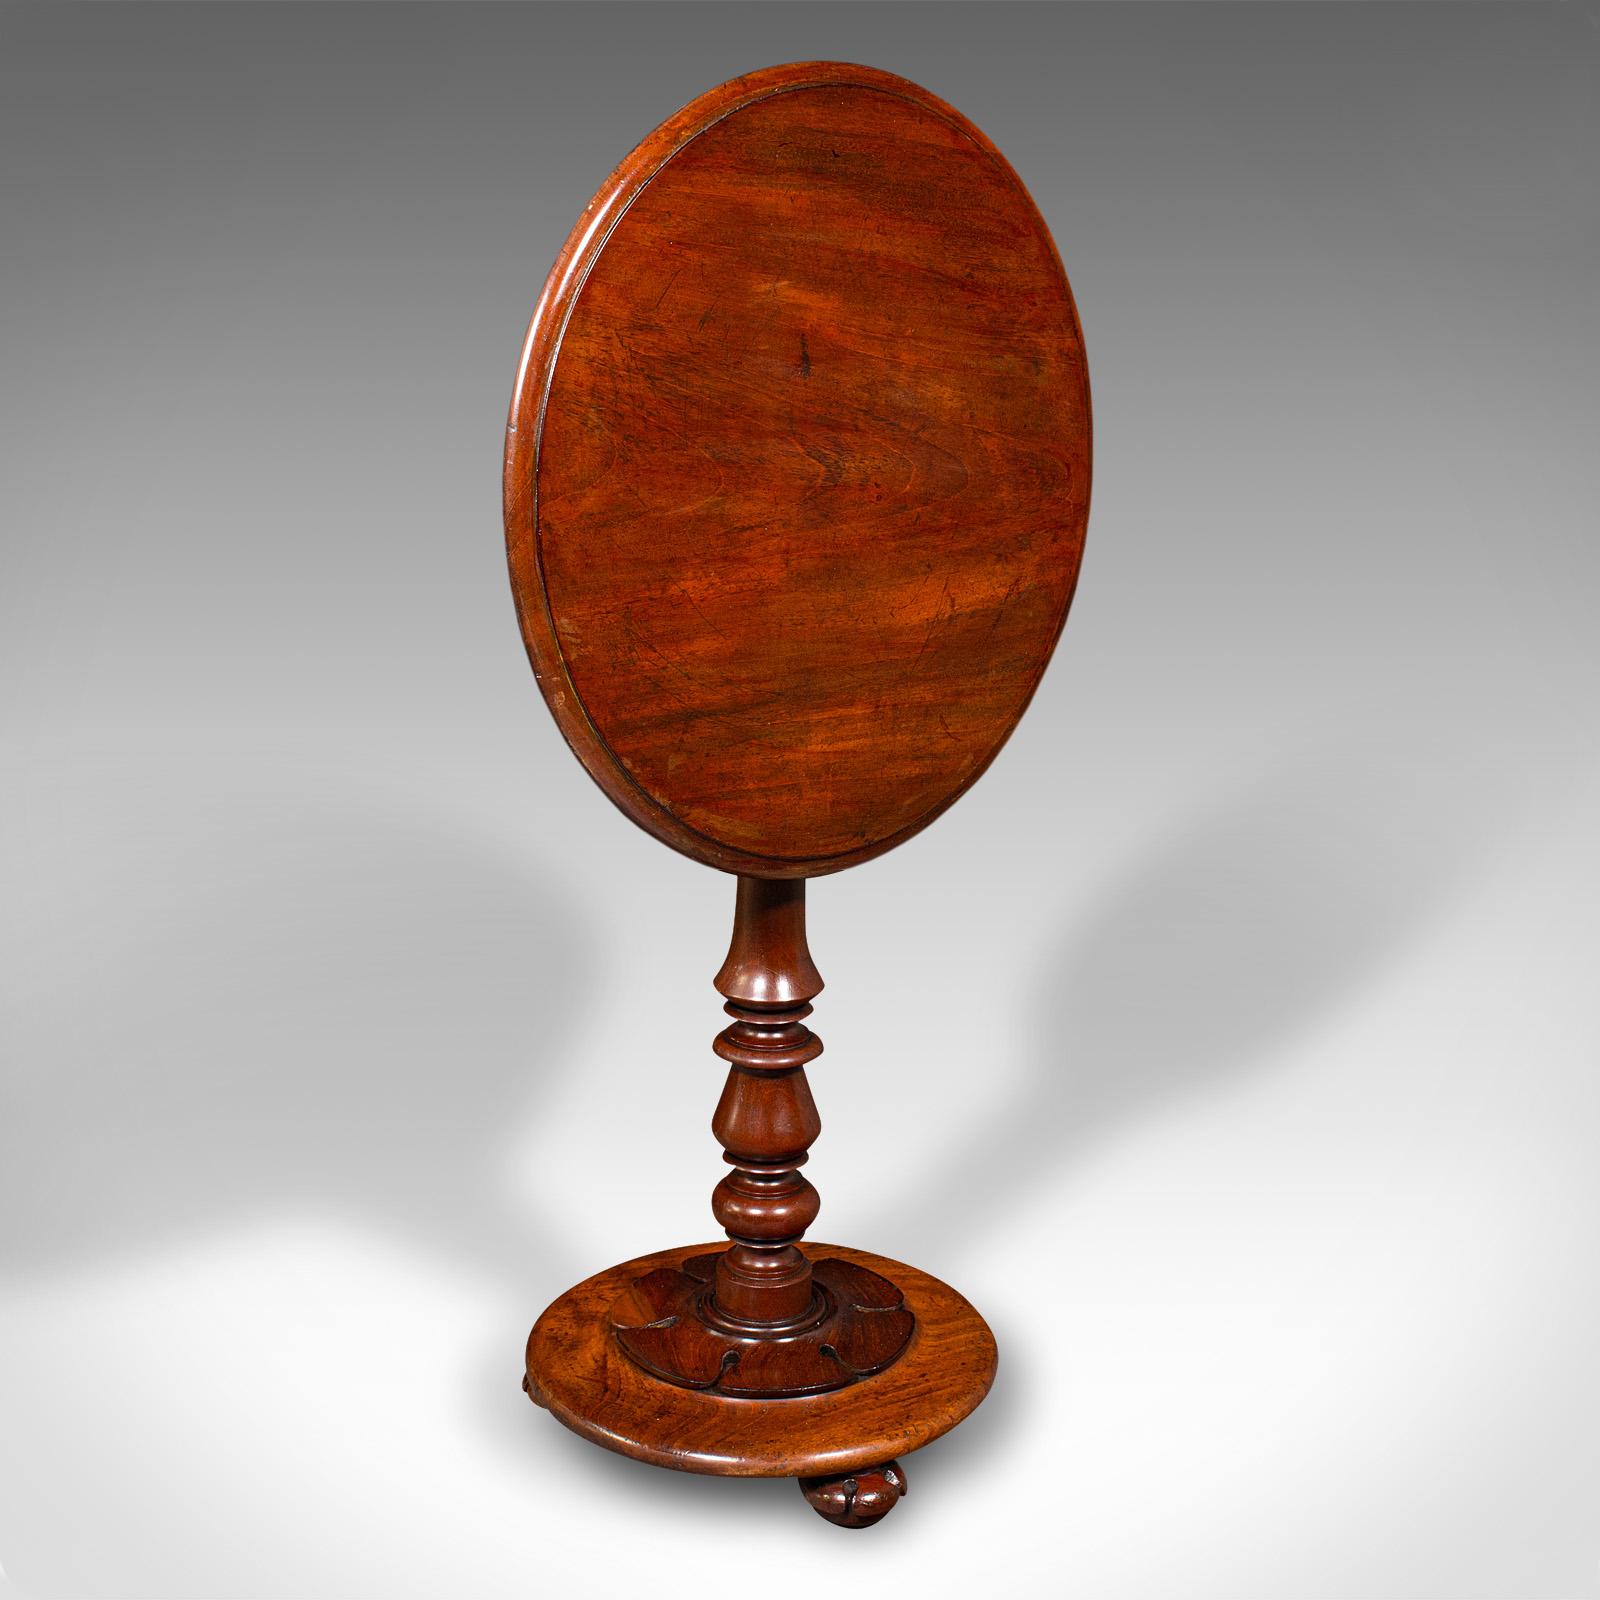 This is an antique tilt top wine table. An English, mahogany side or lamp table, dating to the the William IV period, circa 1835.

Fine example of William IV craftsmanship with useful tilting top
Displays a desirable aged patina and in very good